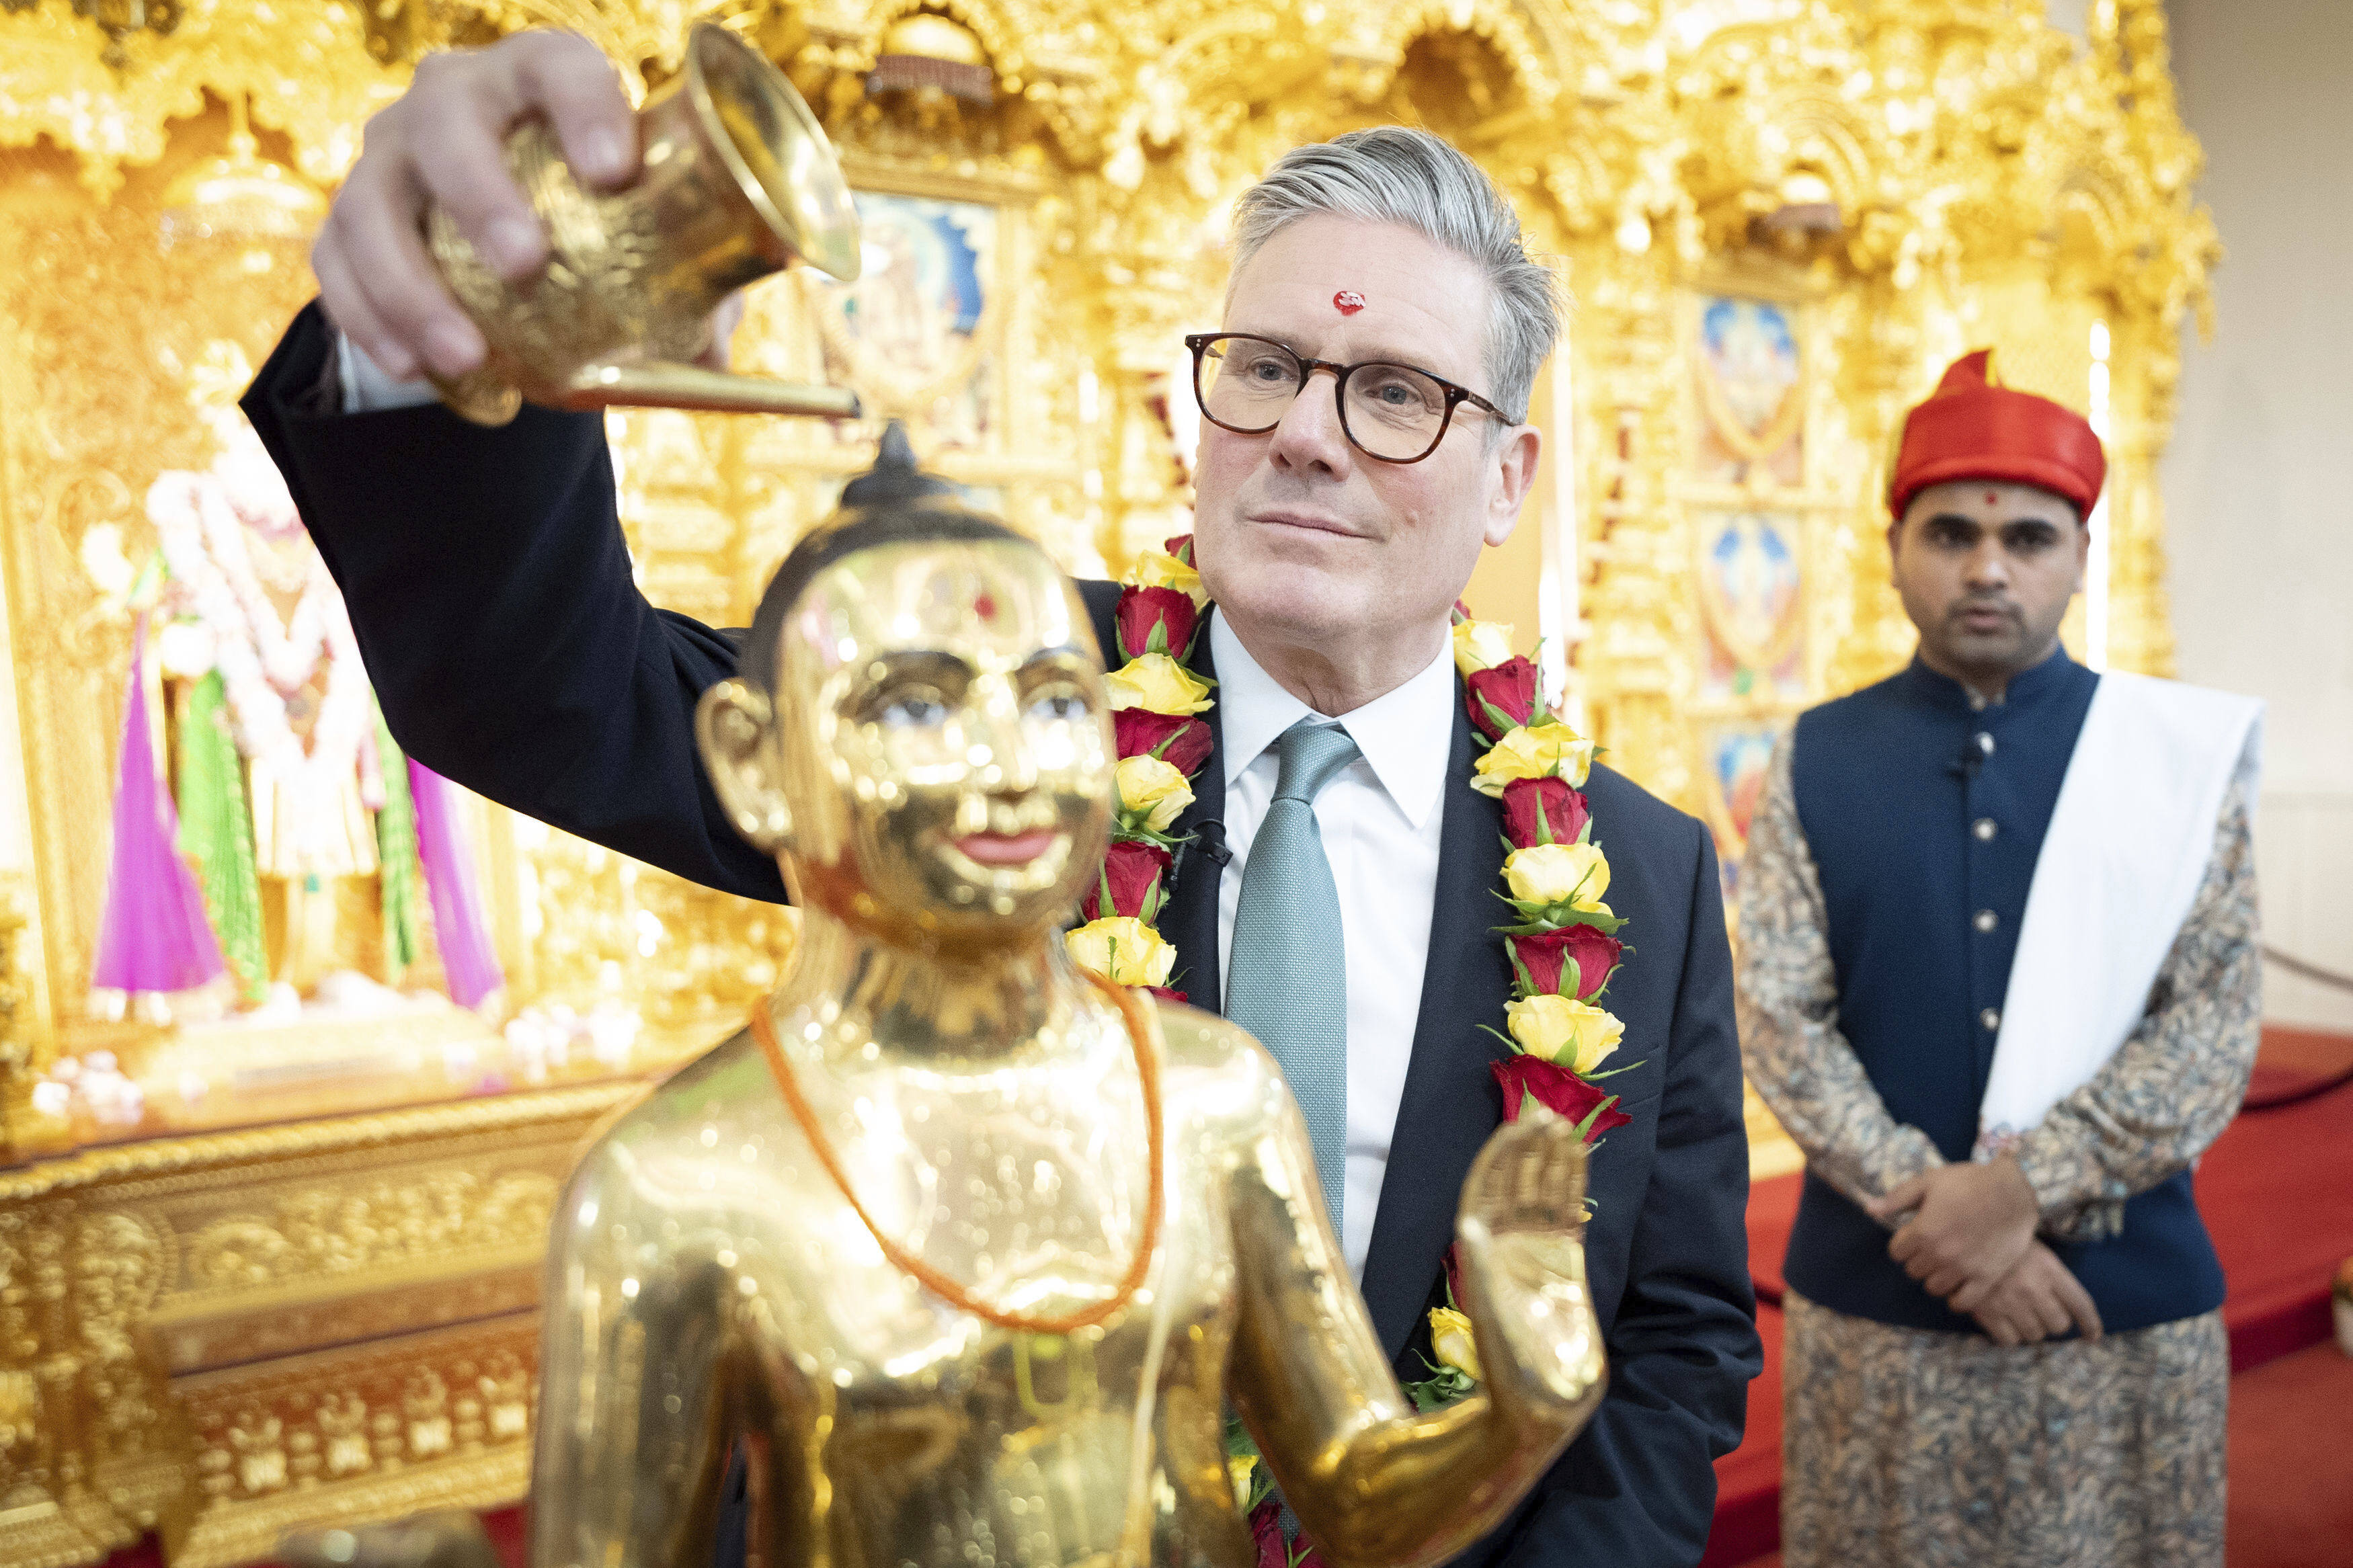 Labour Party leader Sir Keir Starmer during a visit to the Shree Swaminarayan Mandir Hindu temple in Kingsbury, London, while on the election campaign trail on June 28. Photo: AP